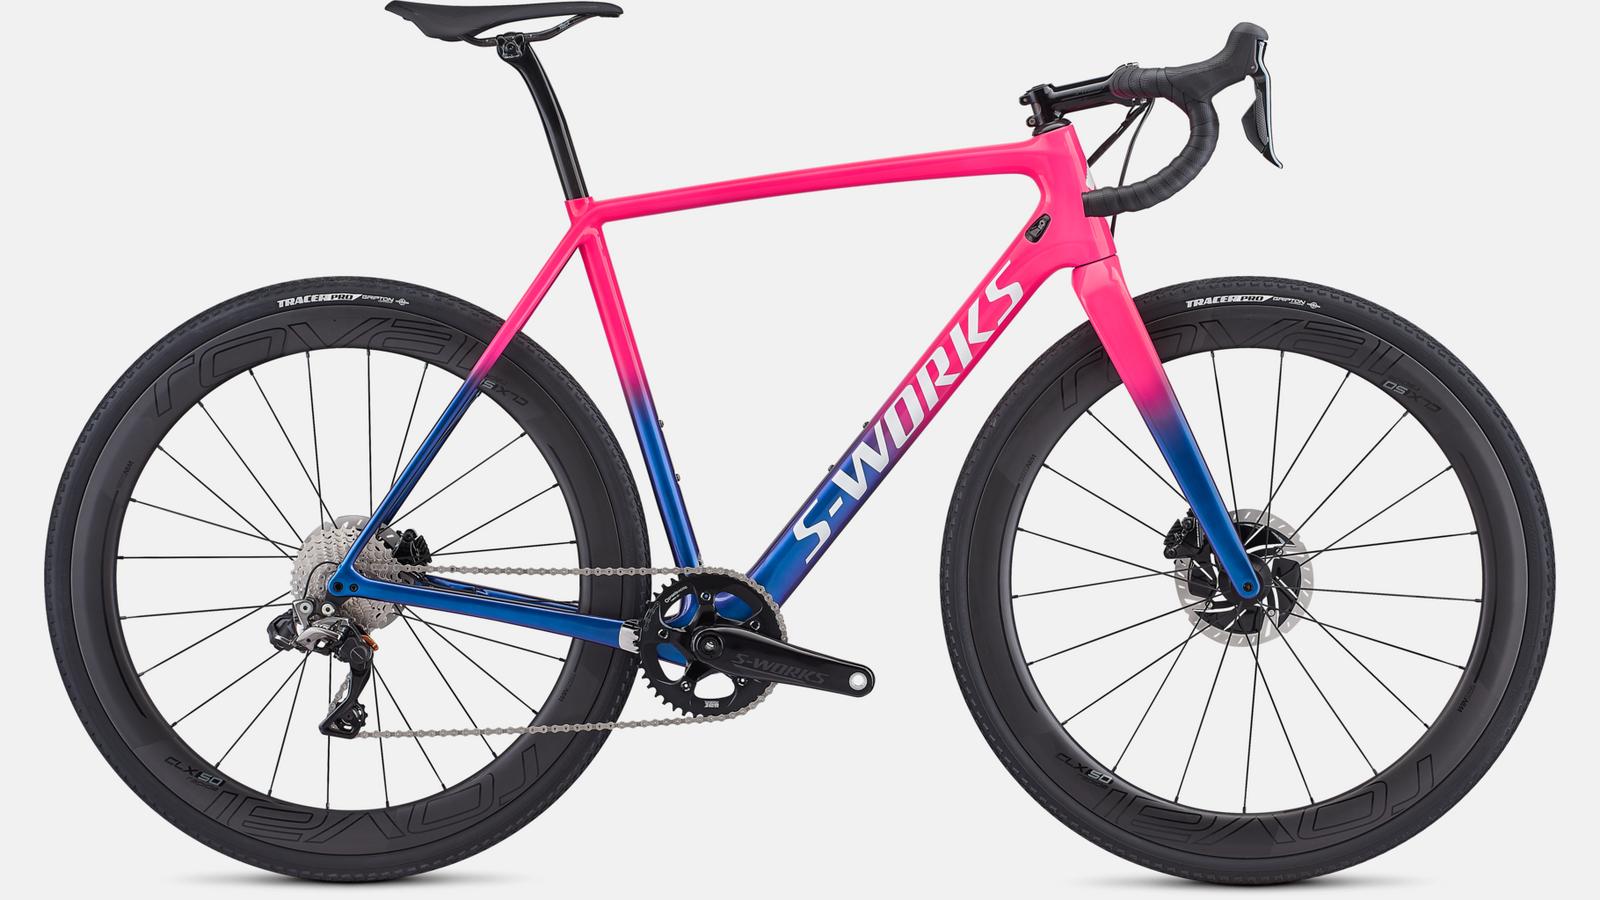 Paint for 2019 Specialized S-Works CruX - Gloss Acid Pink